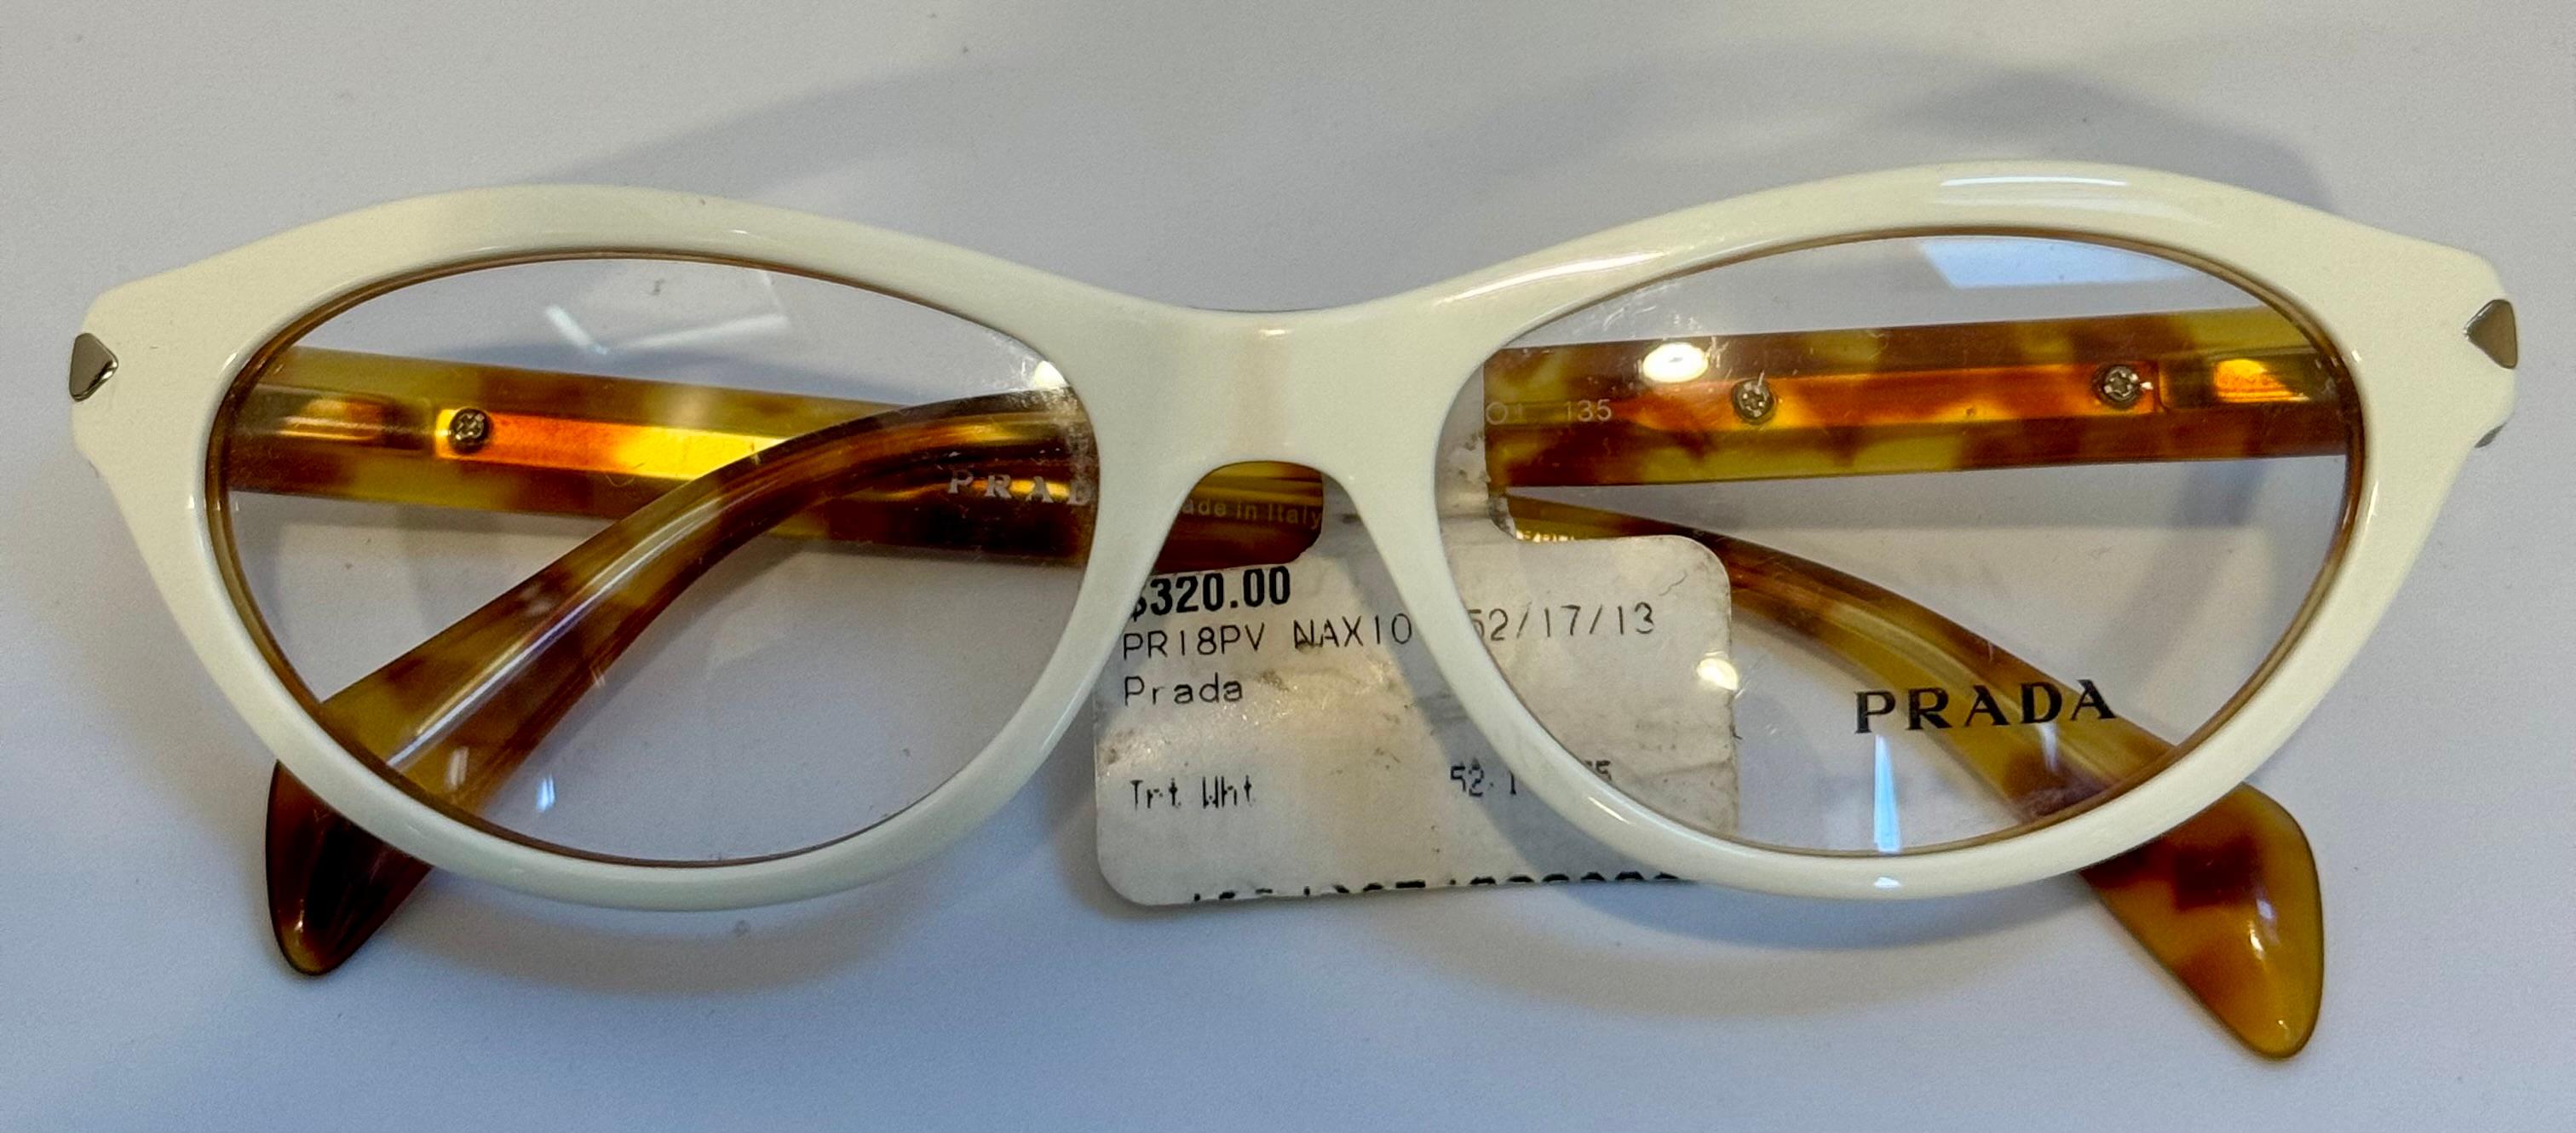 Prada  18 PV MAX 10 52/17/13  Brown honey comb and White Reading Glasses, Italy In Excellent Condition For Sale In New York, NY